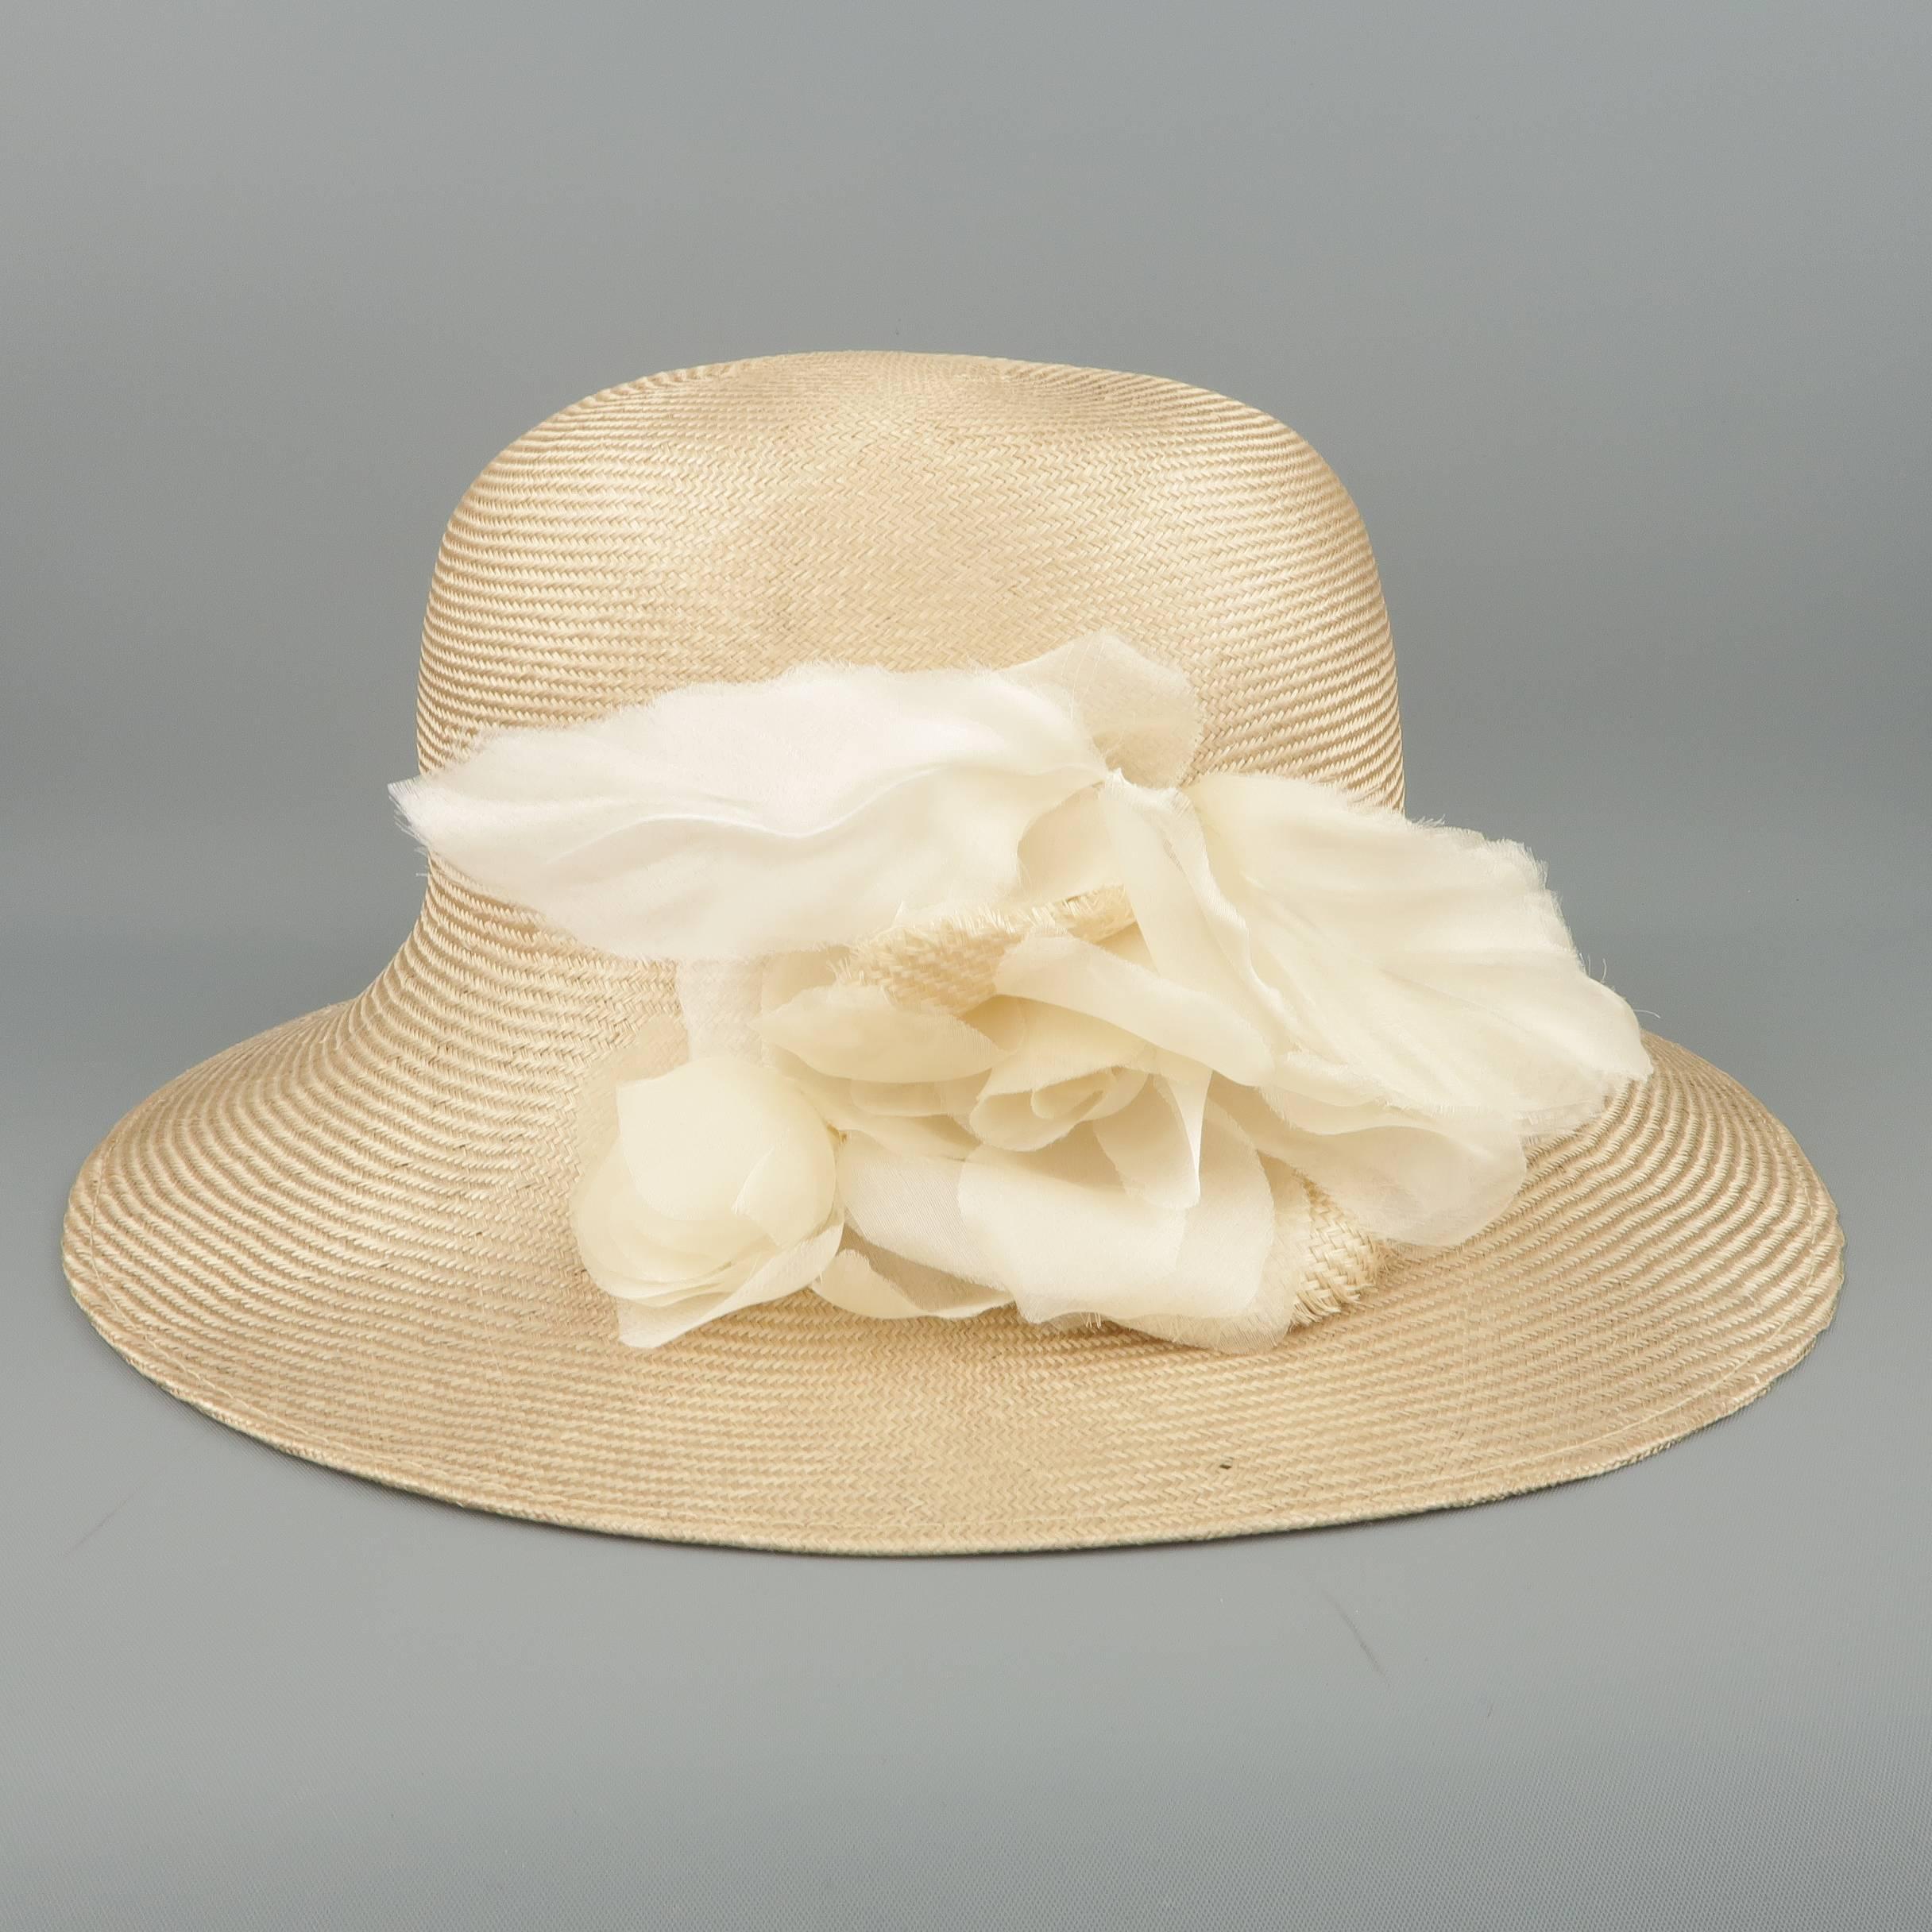 GABRIELA LIGENZA sun hat comes in a shiny blonde beige woven straw and features cream silk organza flower and leaf appliques. Wear throughout including small hole on brim and wear on lining. As-is. Includes a hat box.  Made in Italy.
 
Good